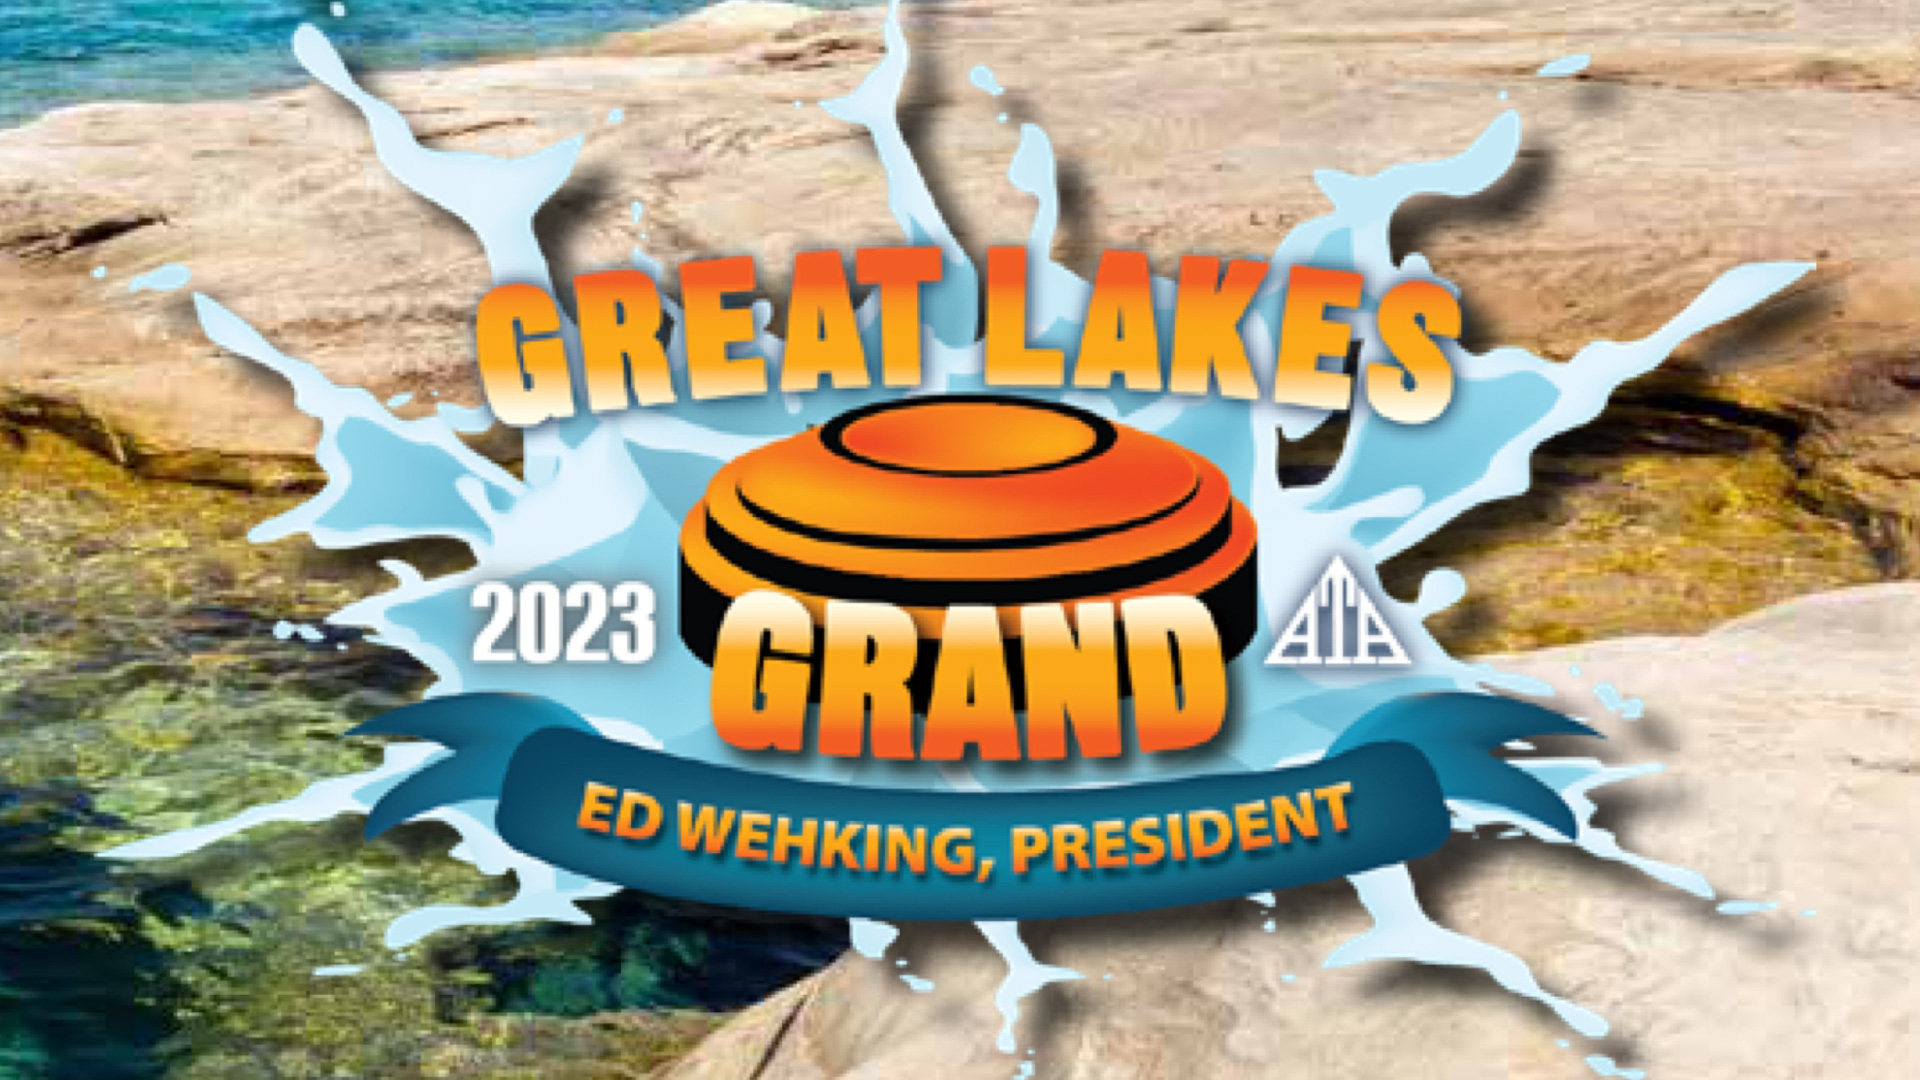 PreSquad Now For The 2023 Great Lakes Grand An NRA Shooting Sports